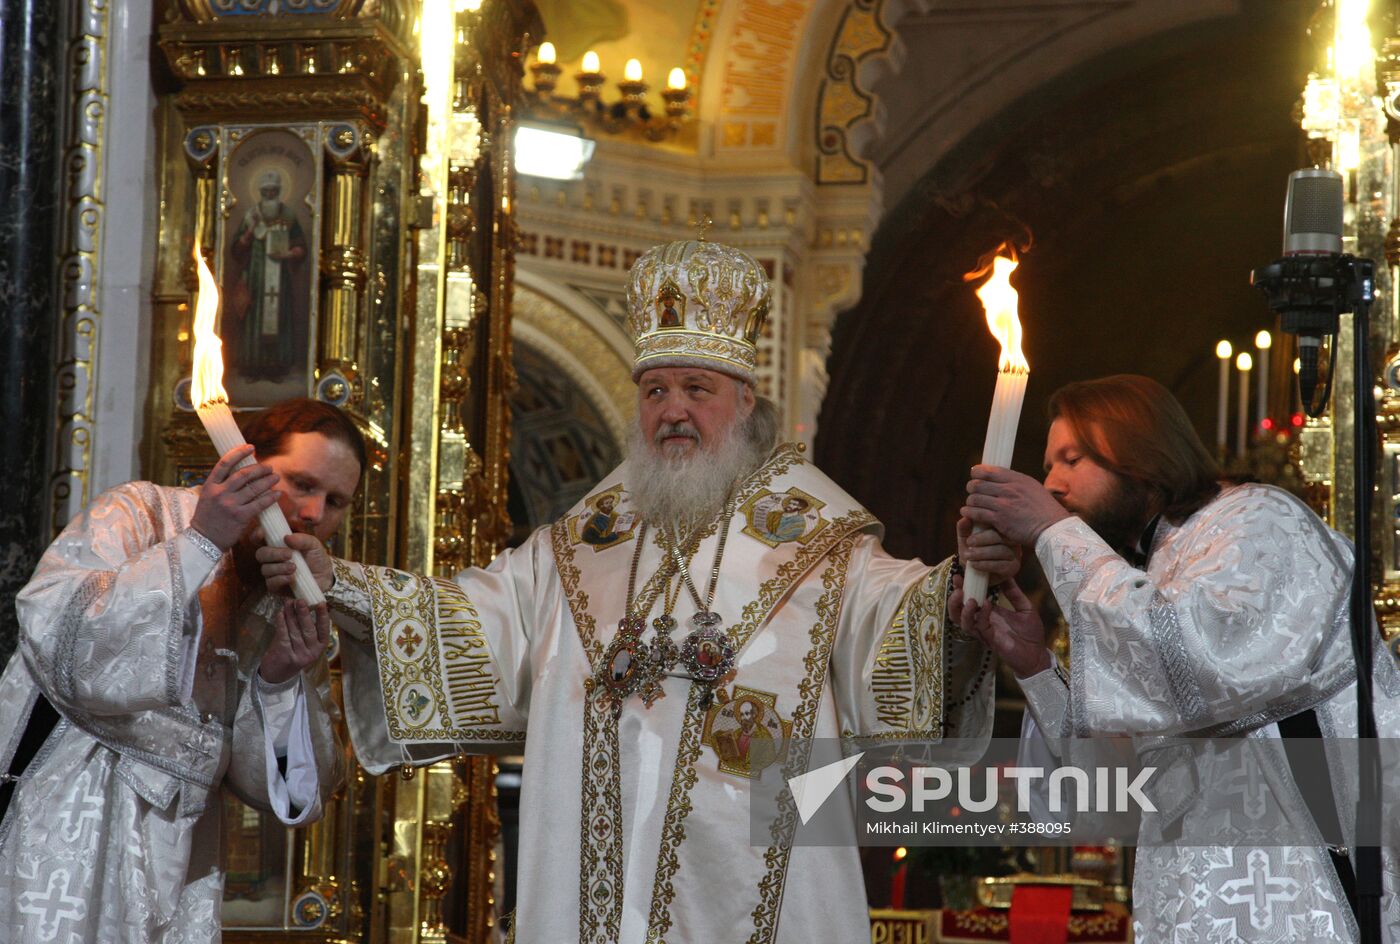 Easter service at Moscow's Cathedral of Christ the Savior